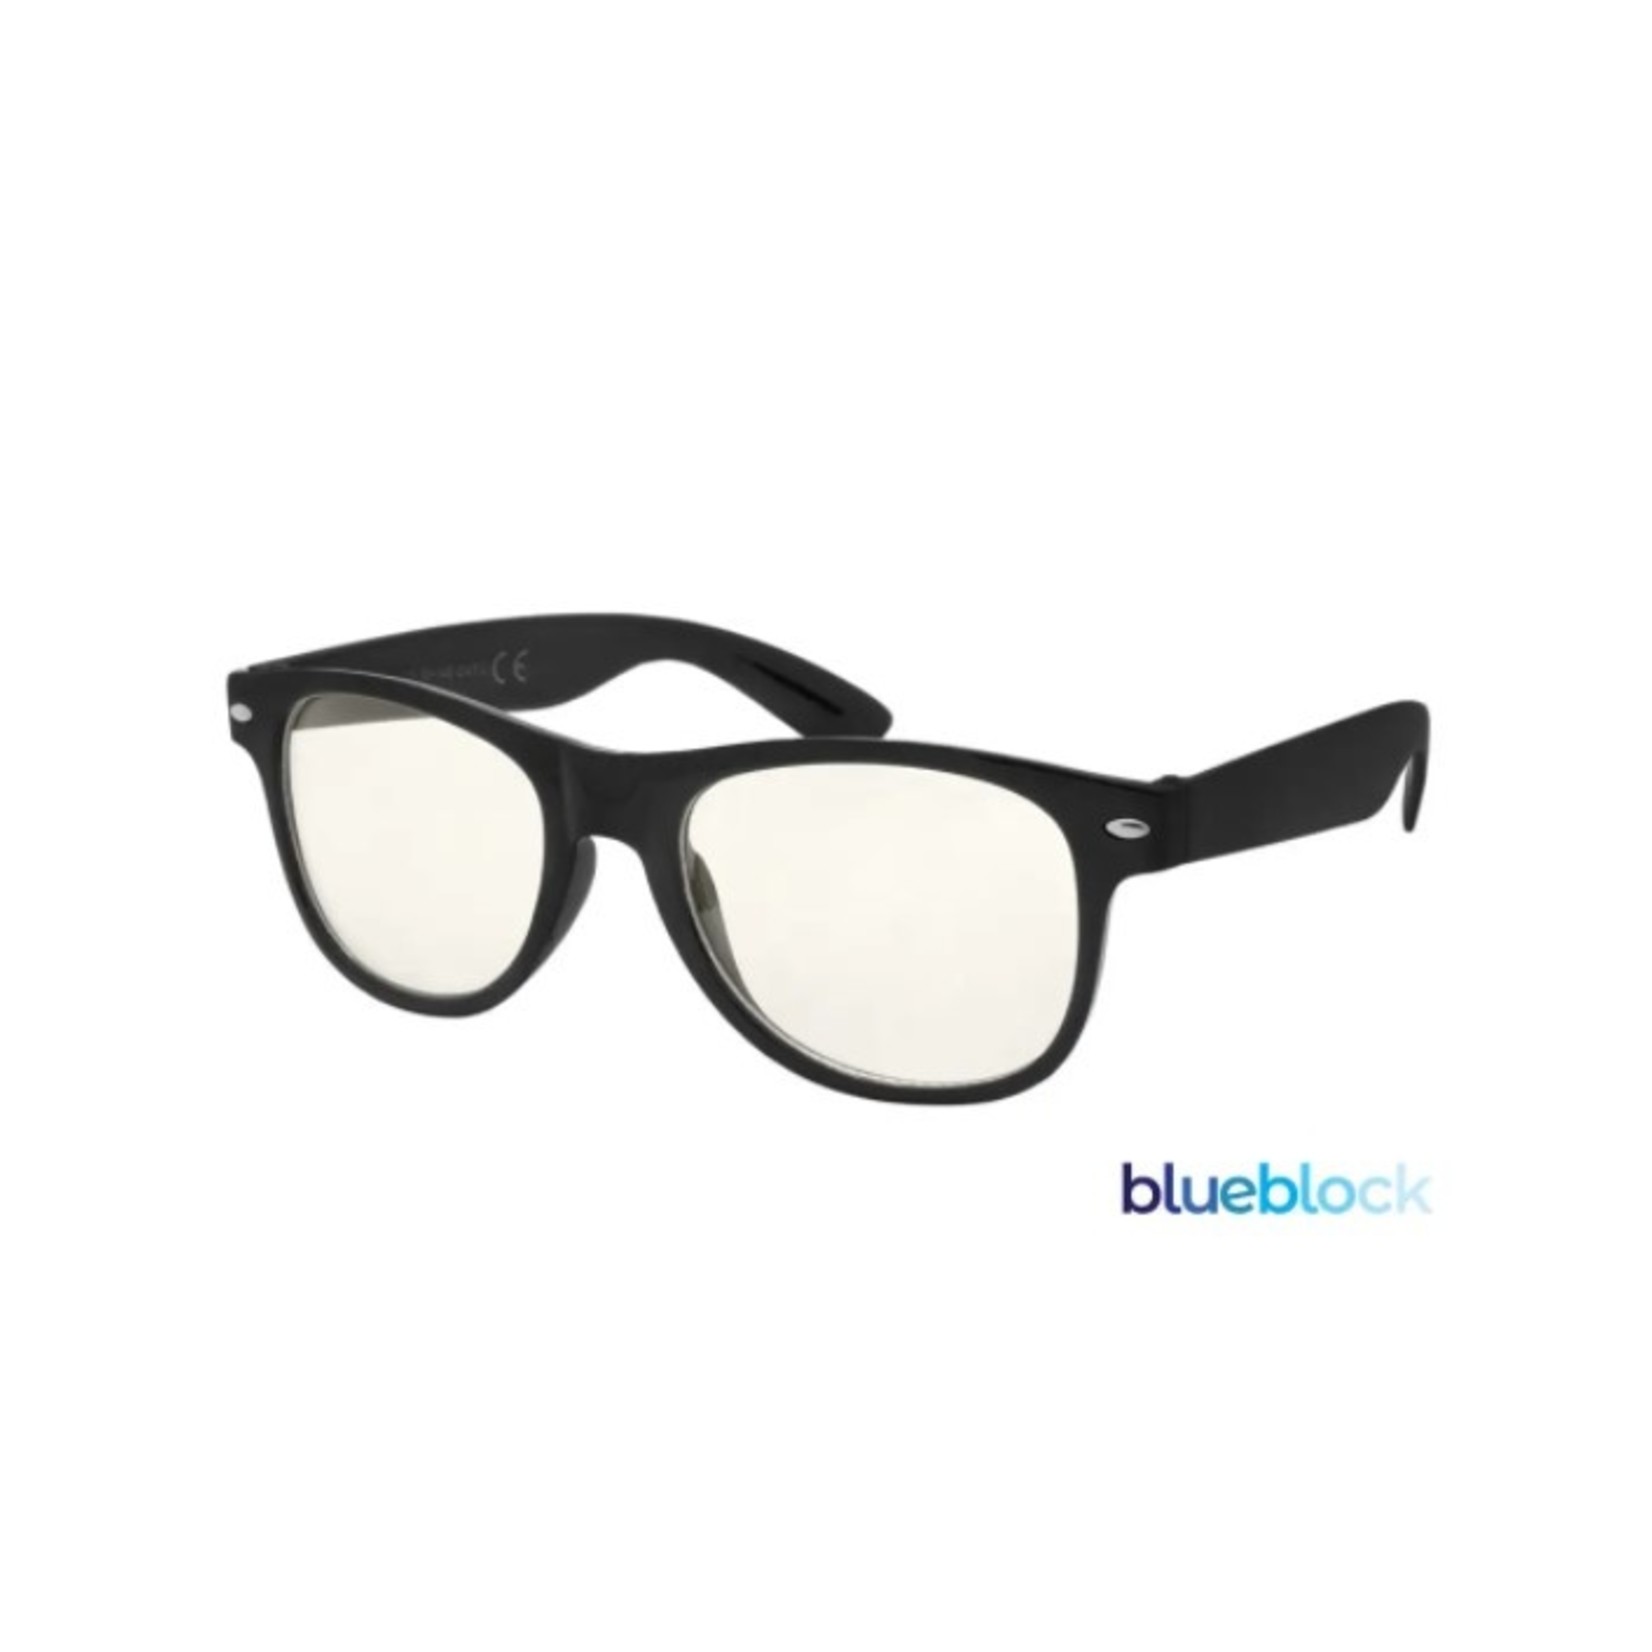 Blueblock Bluelight Block Glasses with Matching Pouch